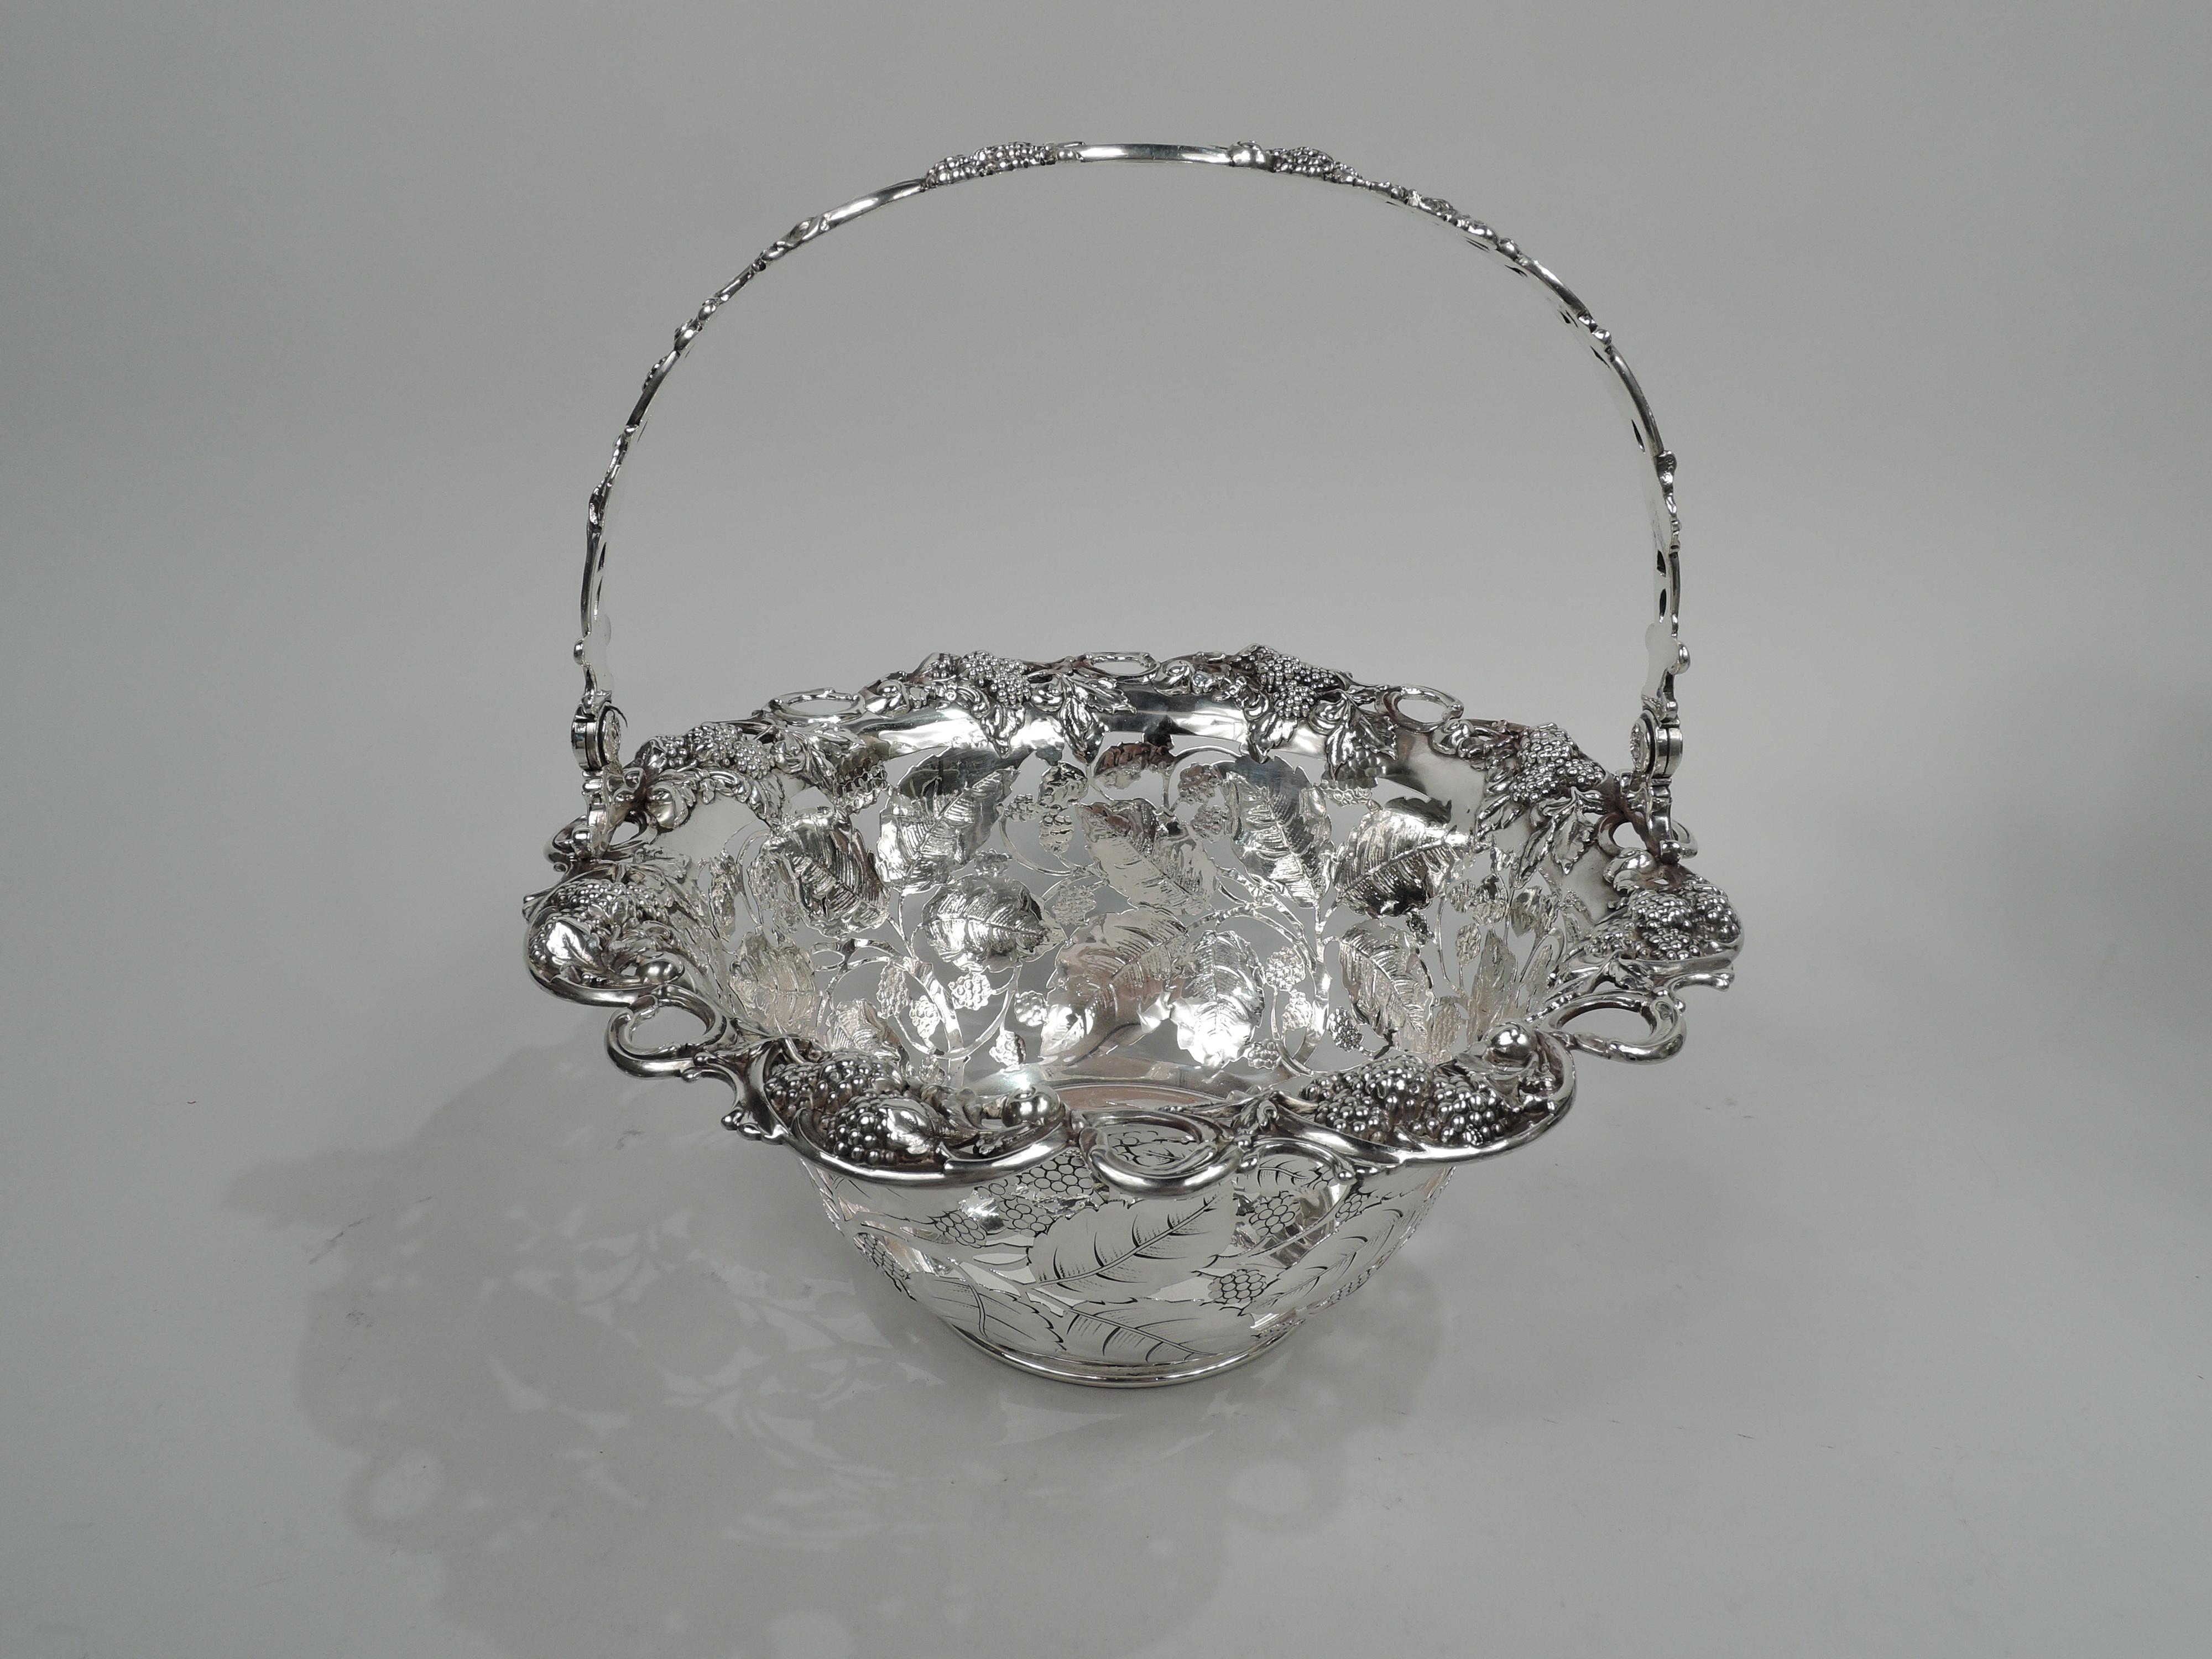 Edwardian sterling silver basket with blackberry motif. Made by Tiffany & Co. in New York, ca 1910. Plain and solid well. Curved and open sides comprising fruiting blackberry branches heightened with engraving. Open and scrolled rim with more